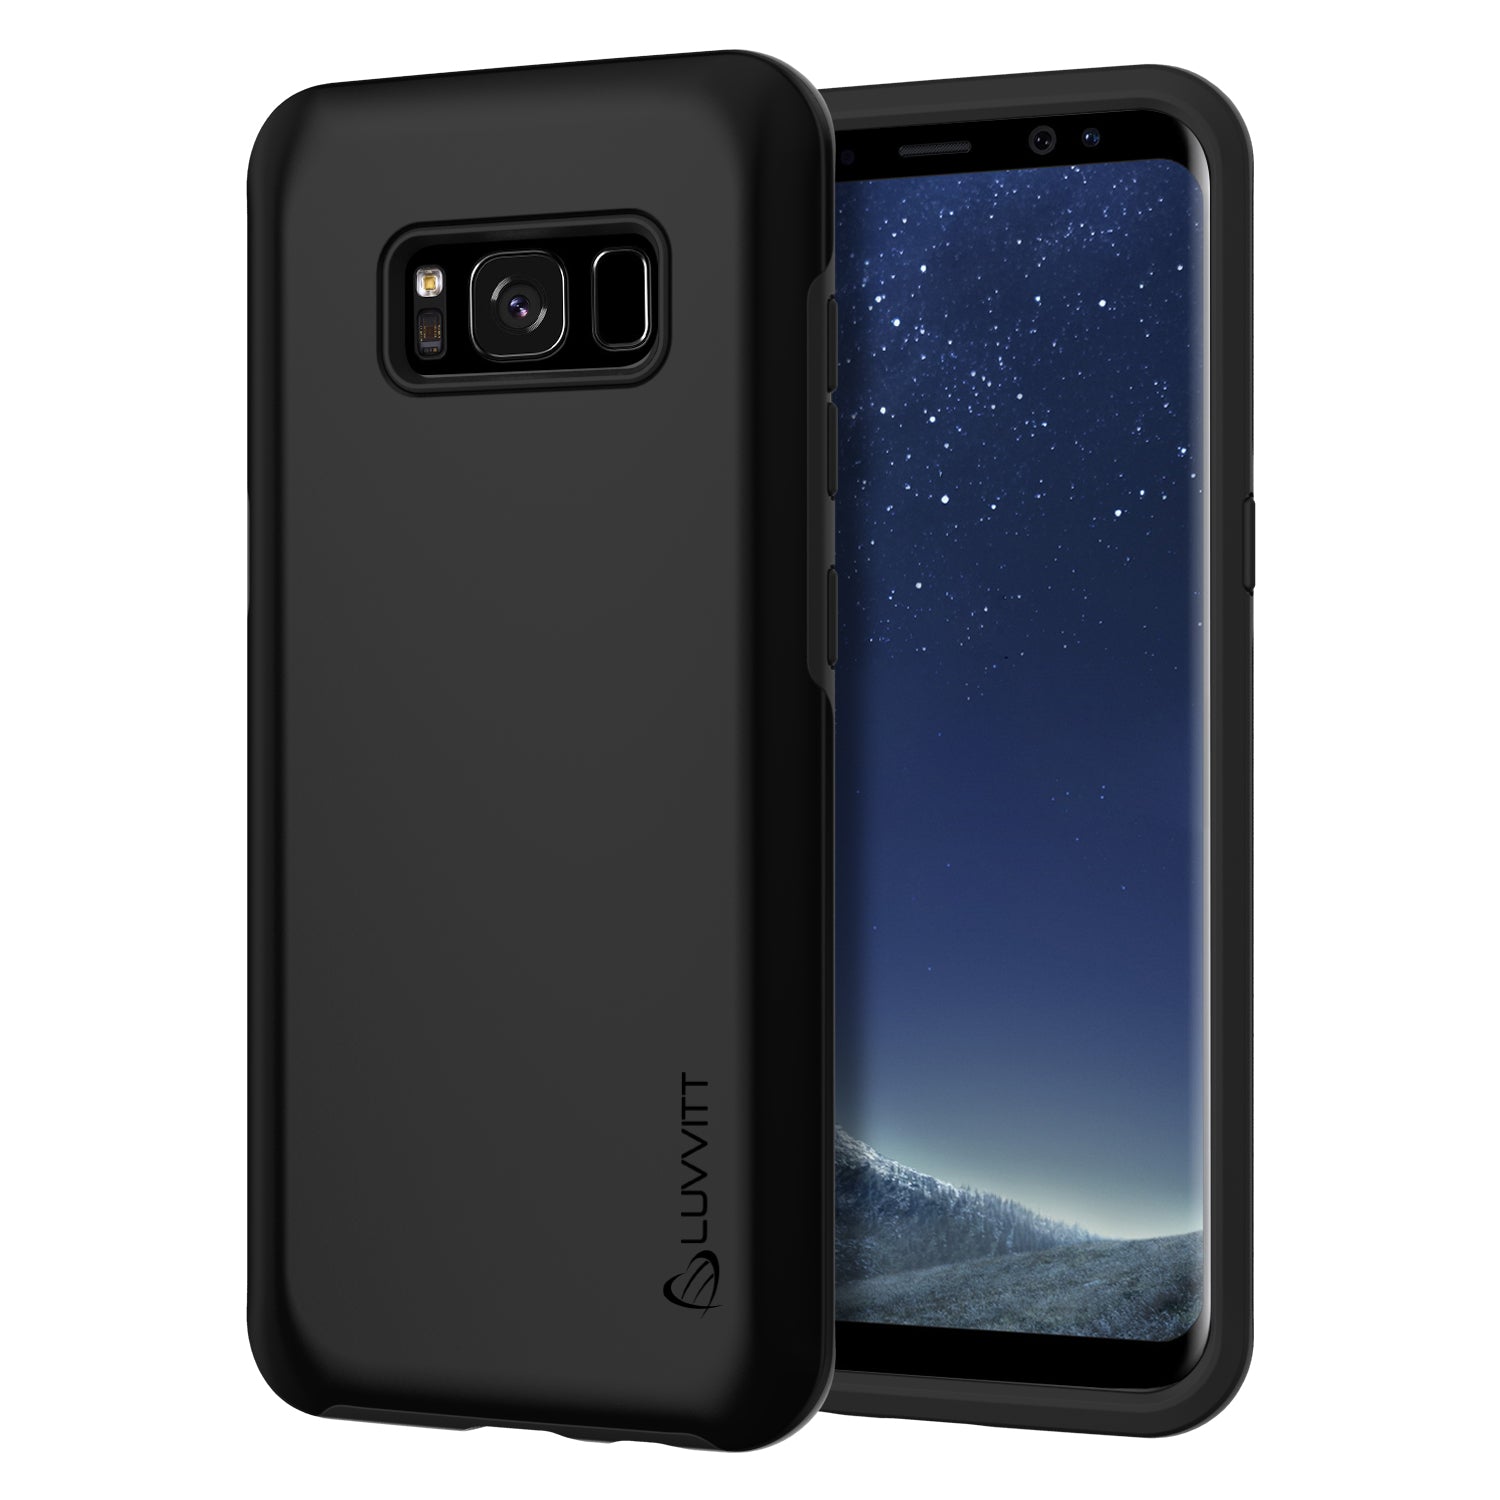 LUVVITT SUPER ARMOR Dual Layer Shock Proof Case for Galaxy S8 - Black